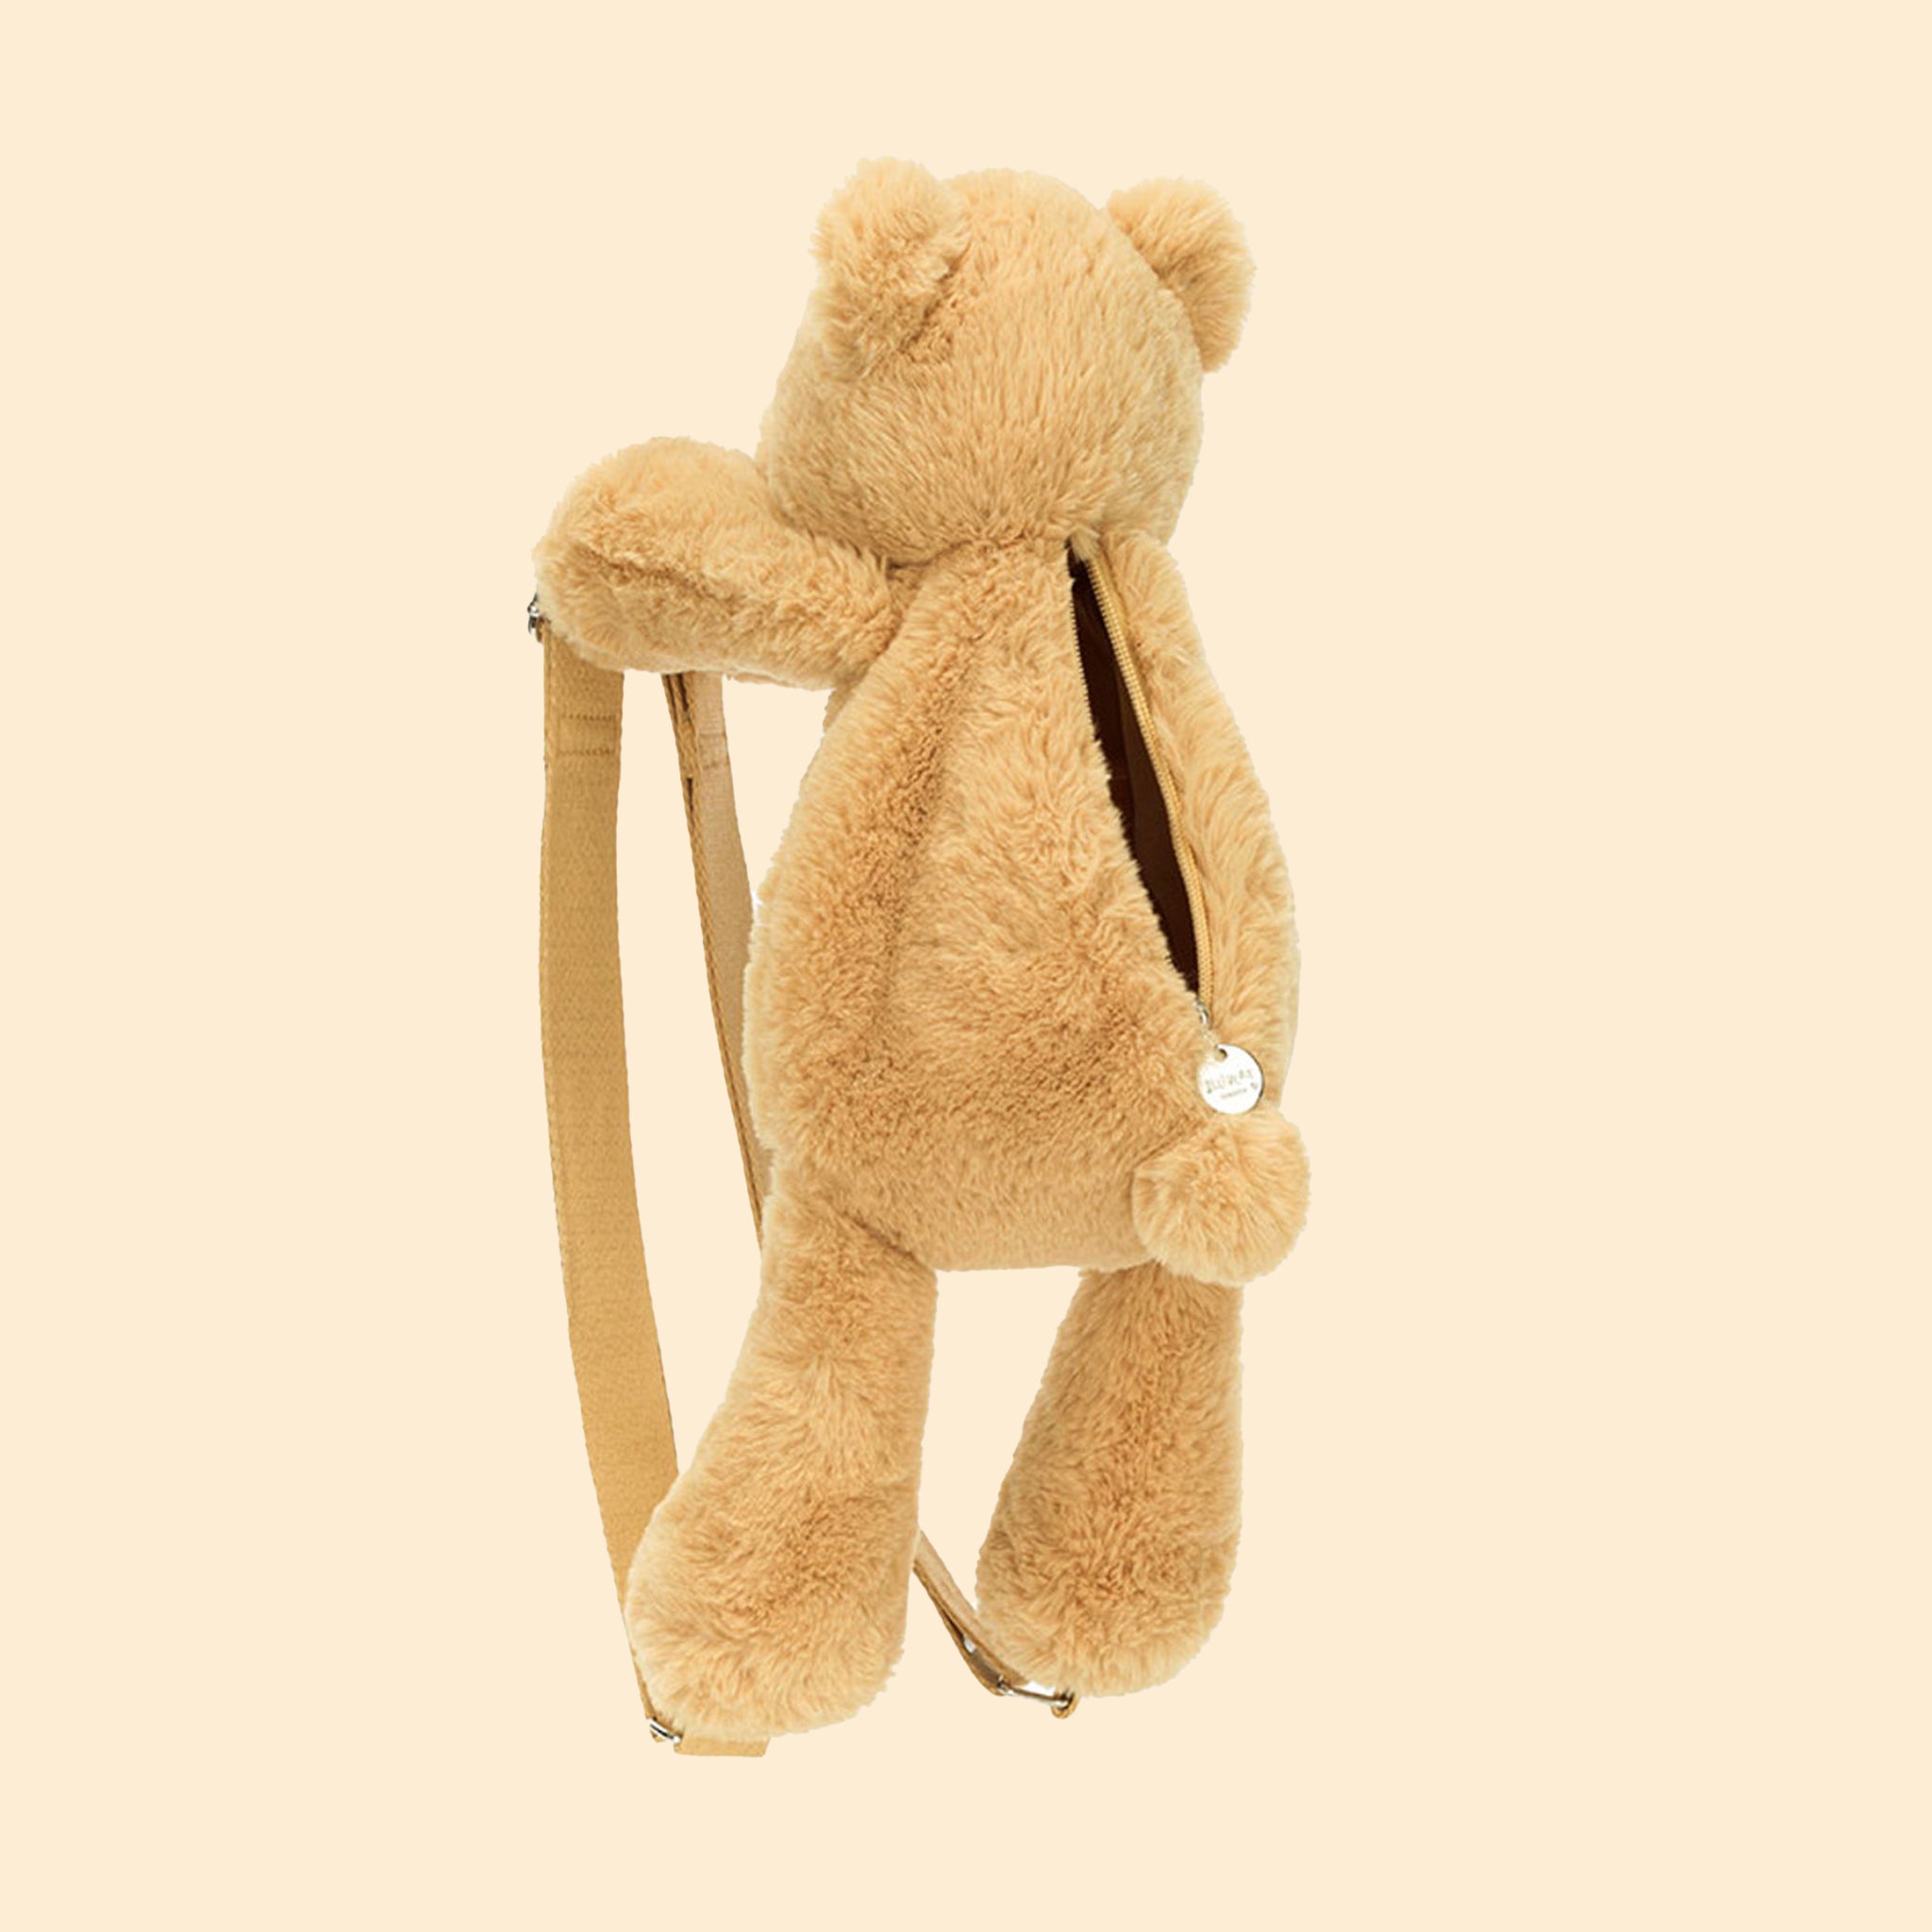 A neutral bear shaped backpack with two straps with silver details.